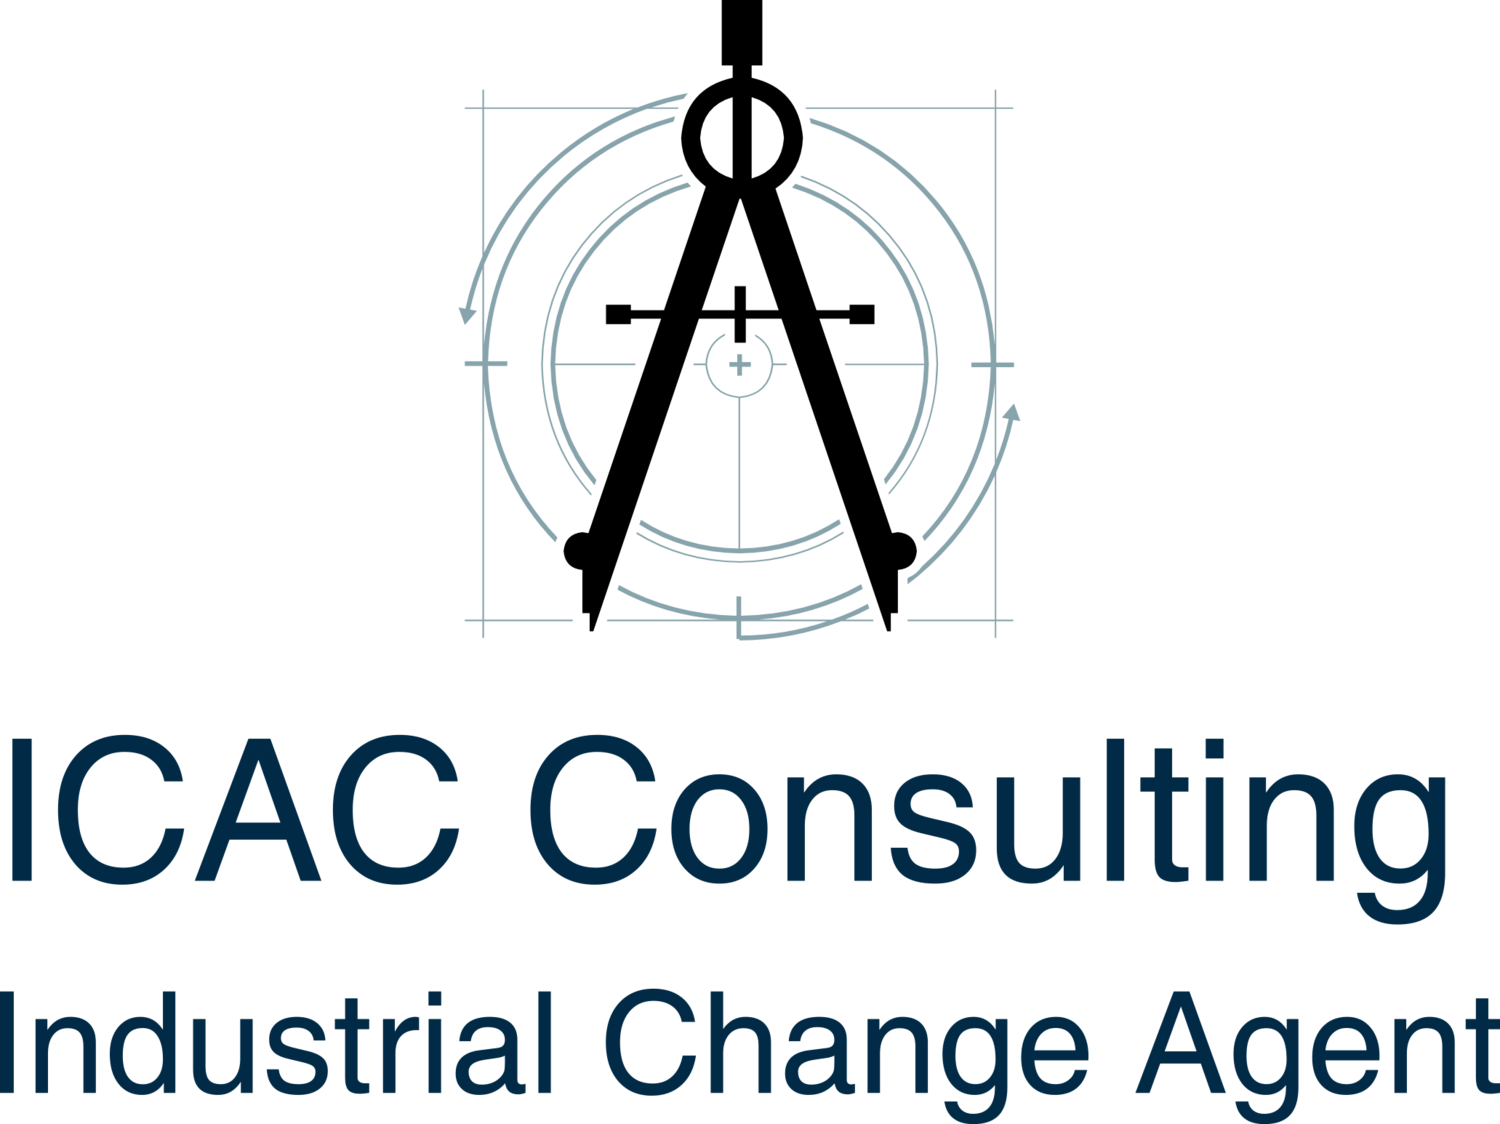 ICAC Consulting